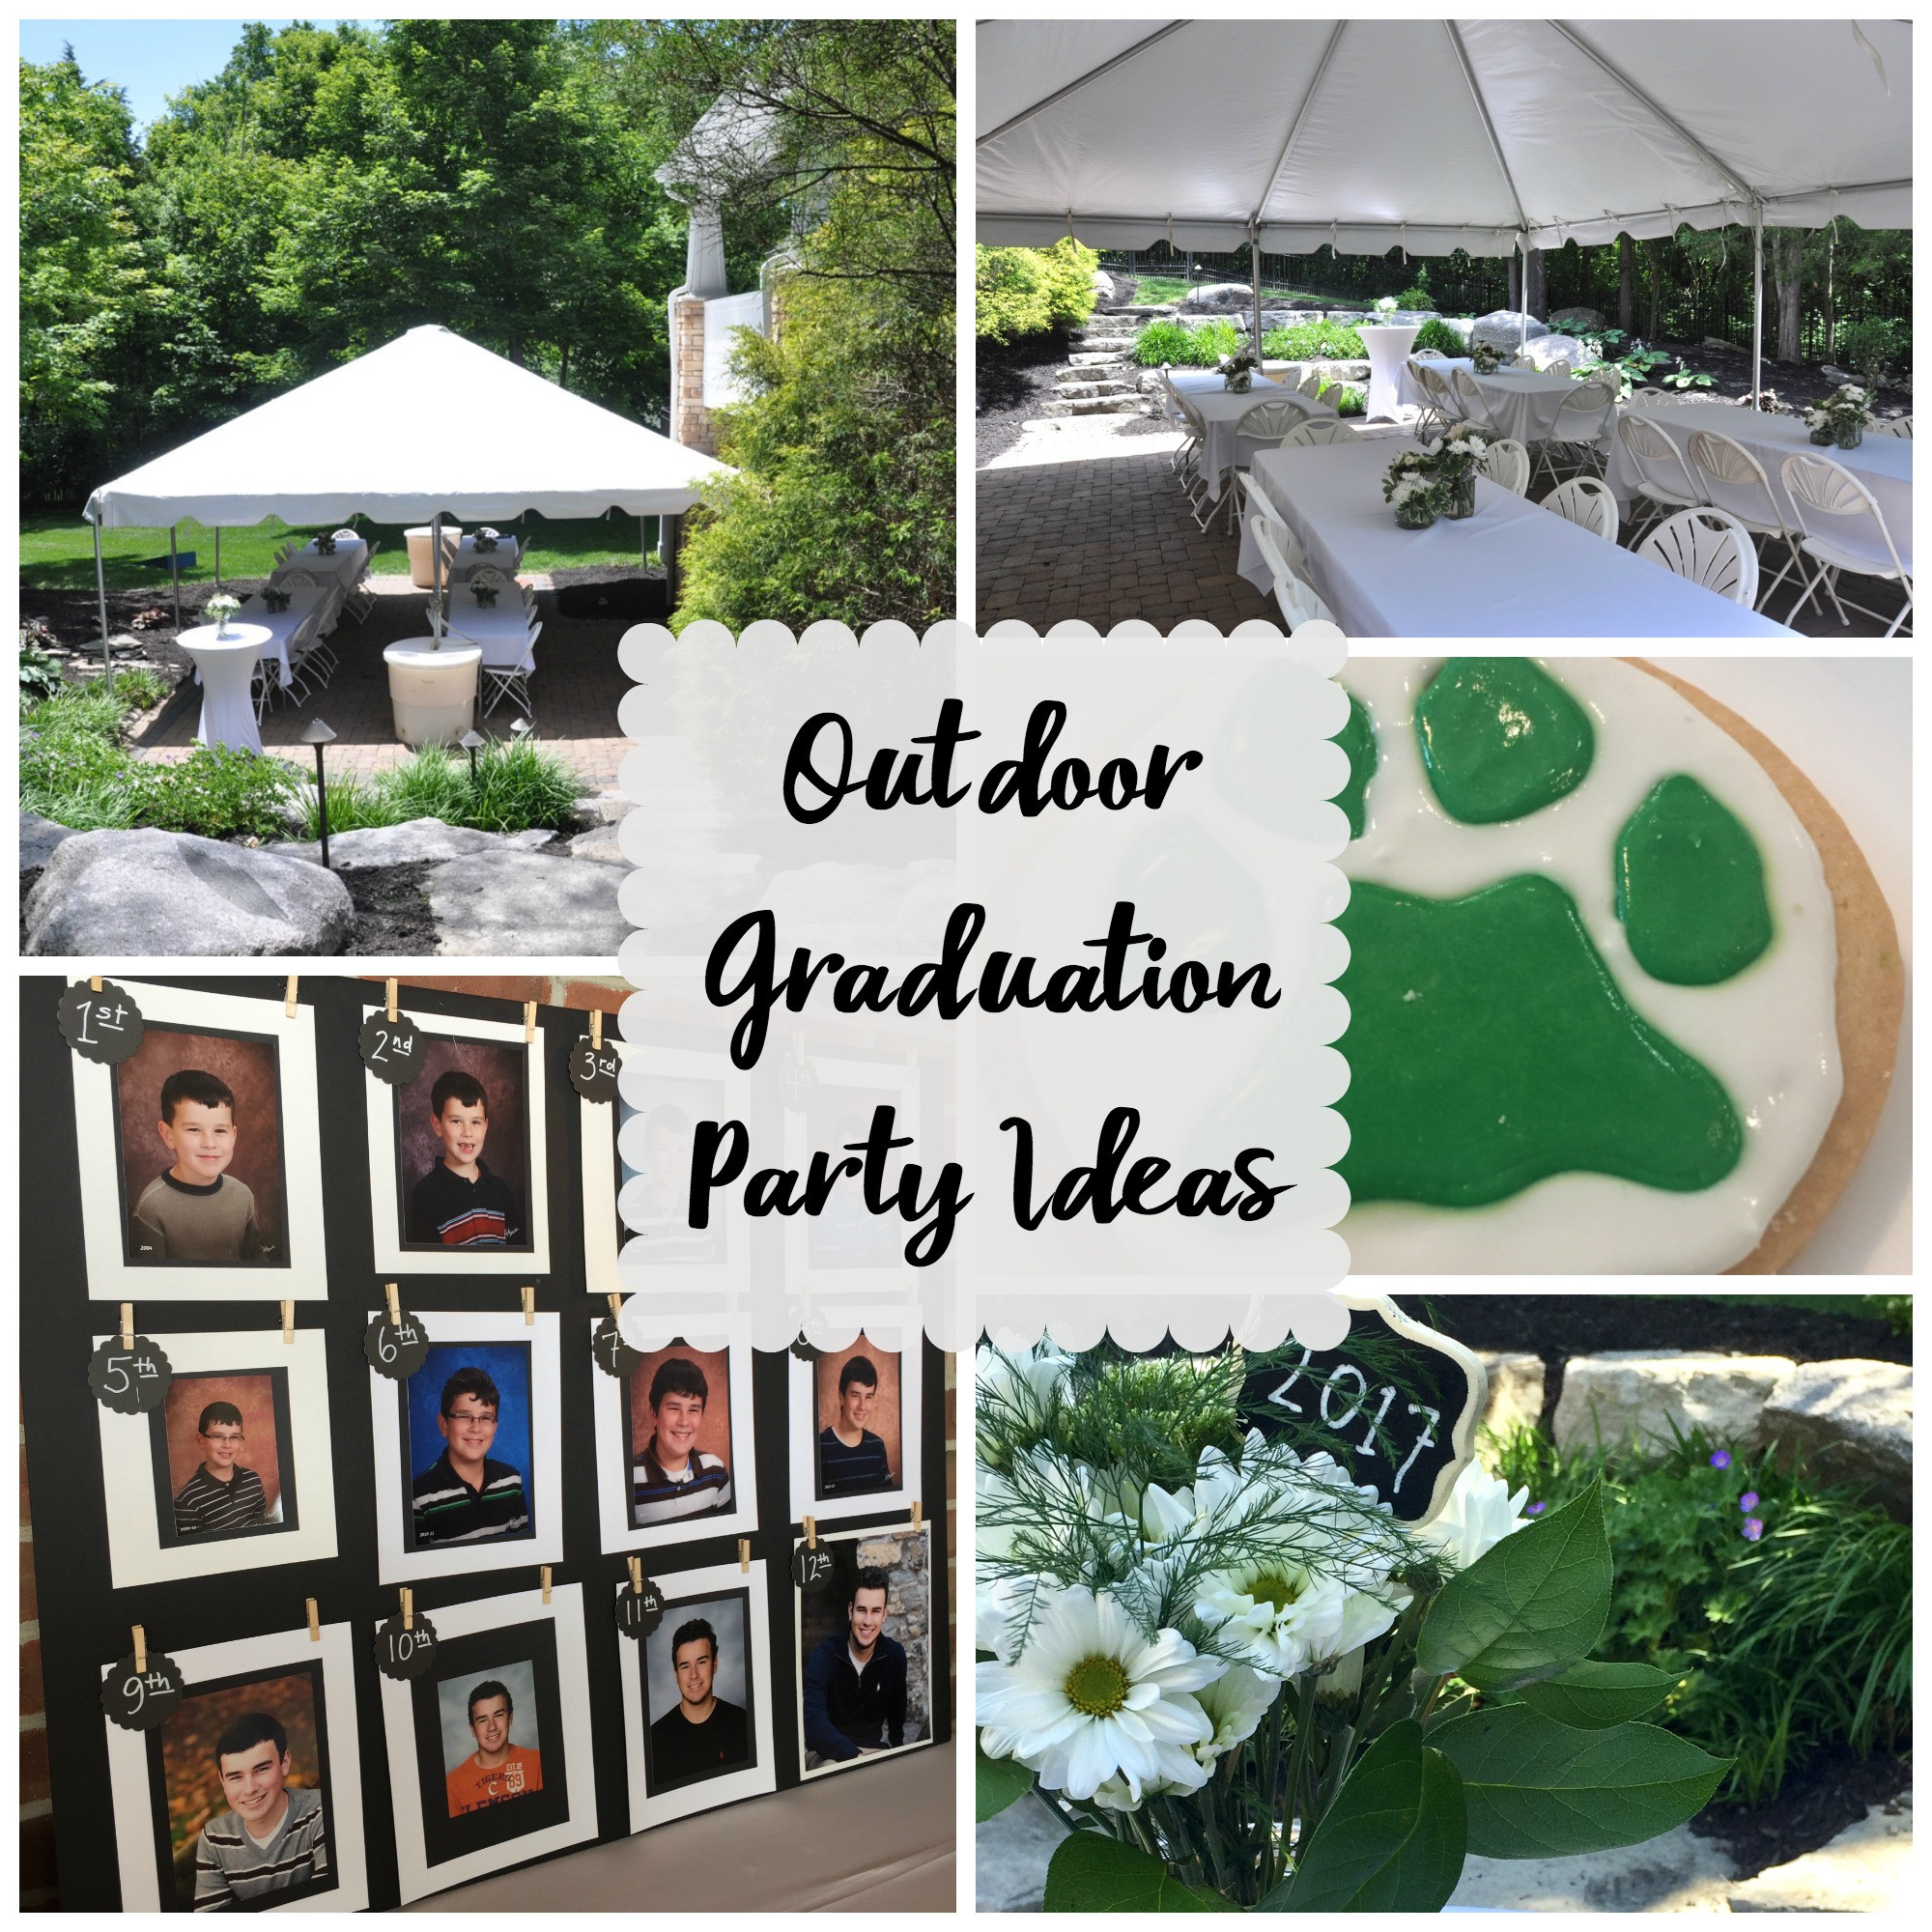 High School Graduation Party Decorations Ideas
 Outdoor Graduation Party Evolution of Style